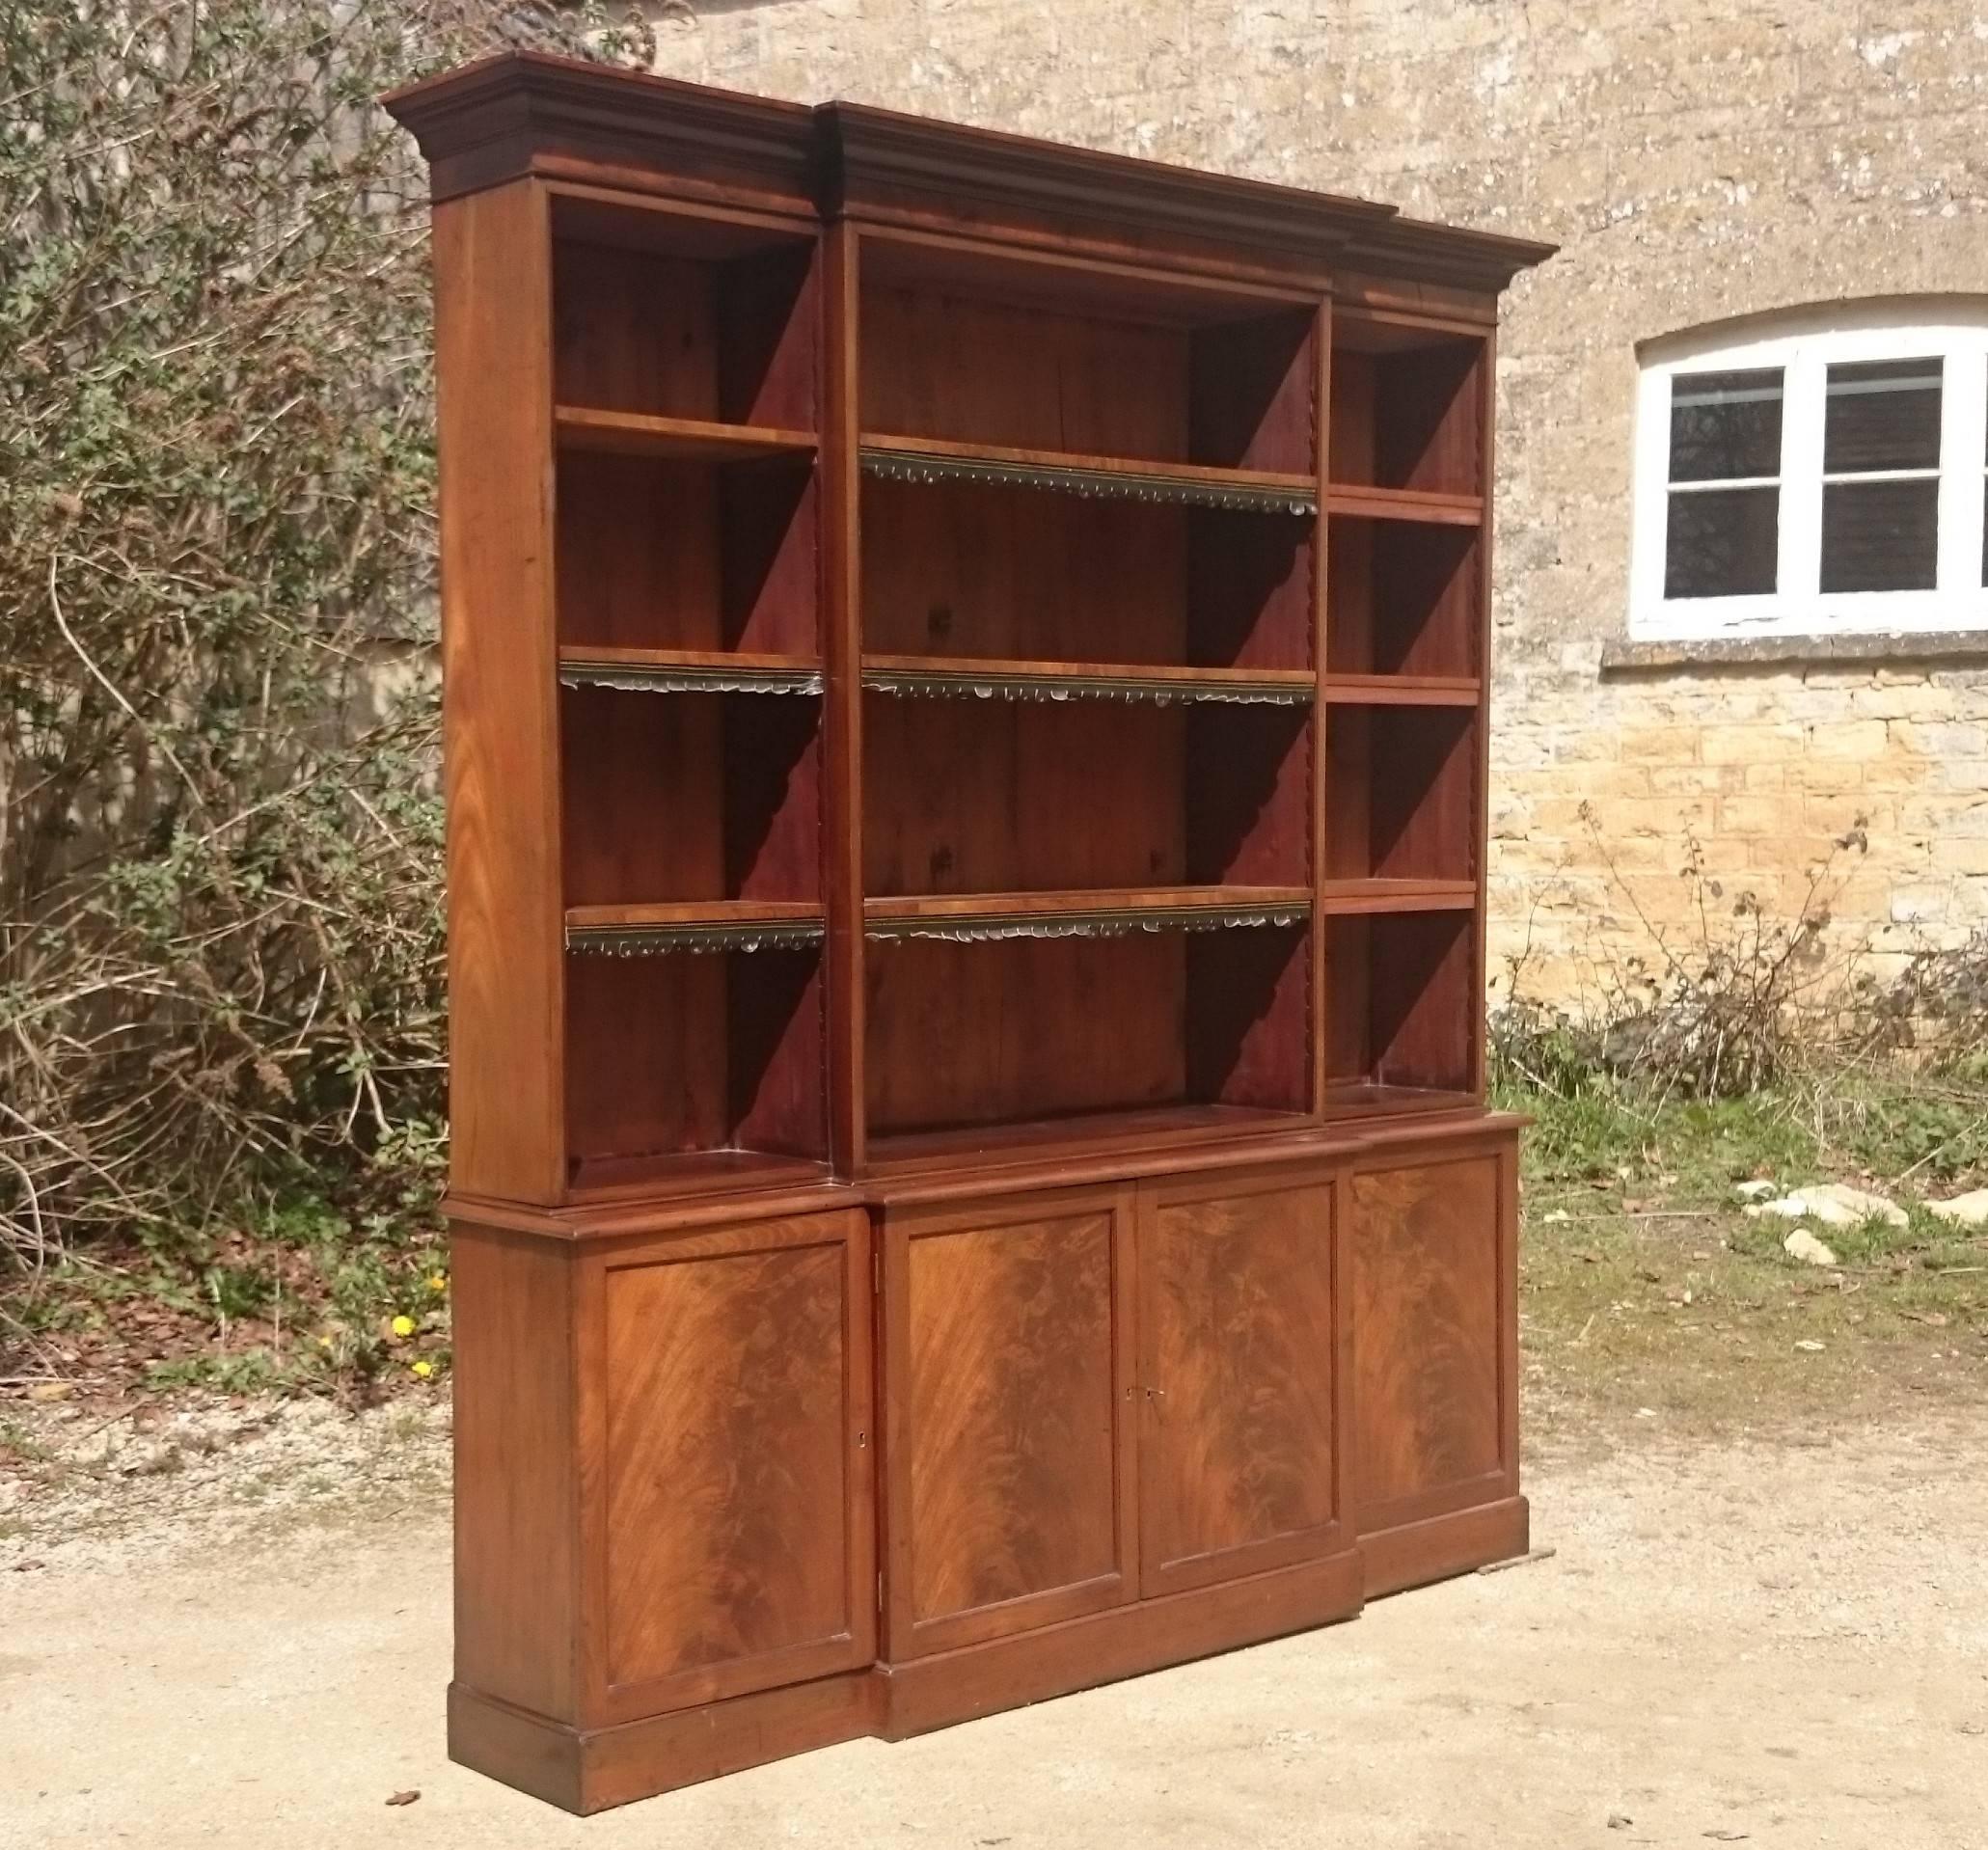 Mahogany antique breakfront bookcase with flame mahogany door fronts and open top. This is a good large scale bookcase made of very good quality timber and with adjustable shelves. This is a magnificent piece of furniture and less expensive than